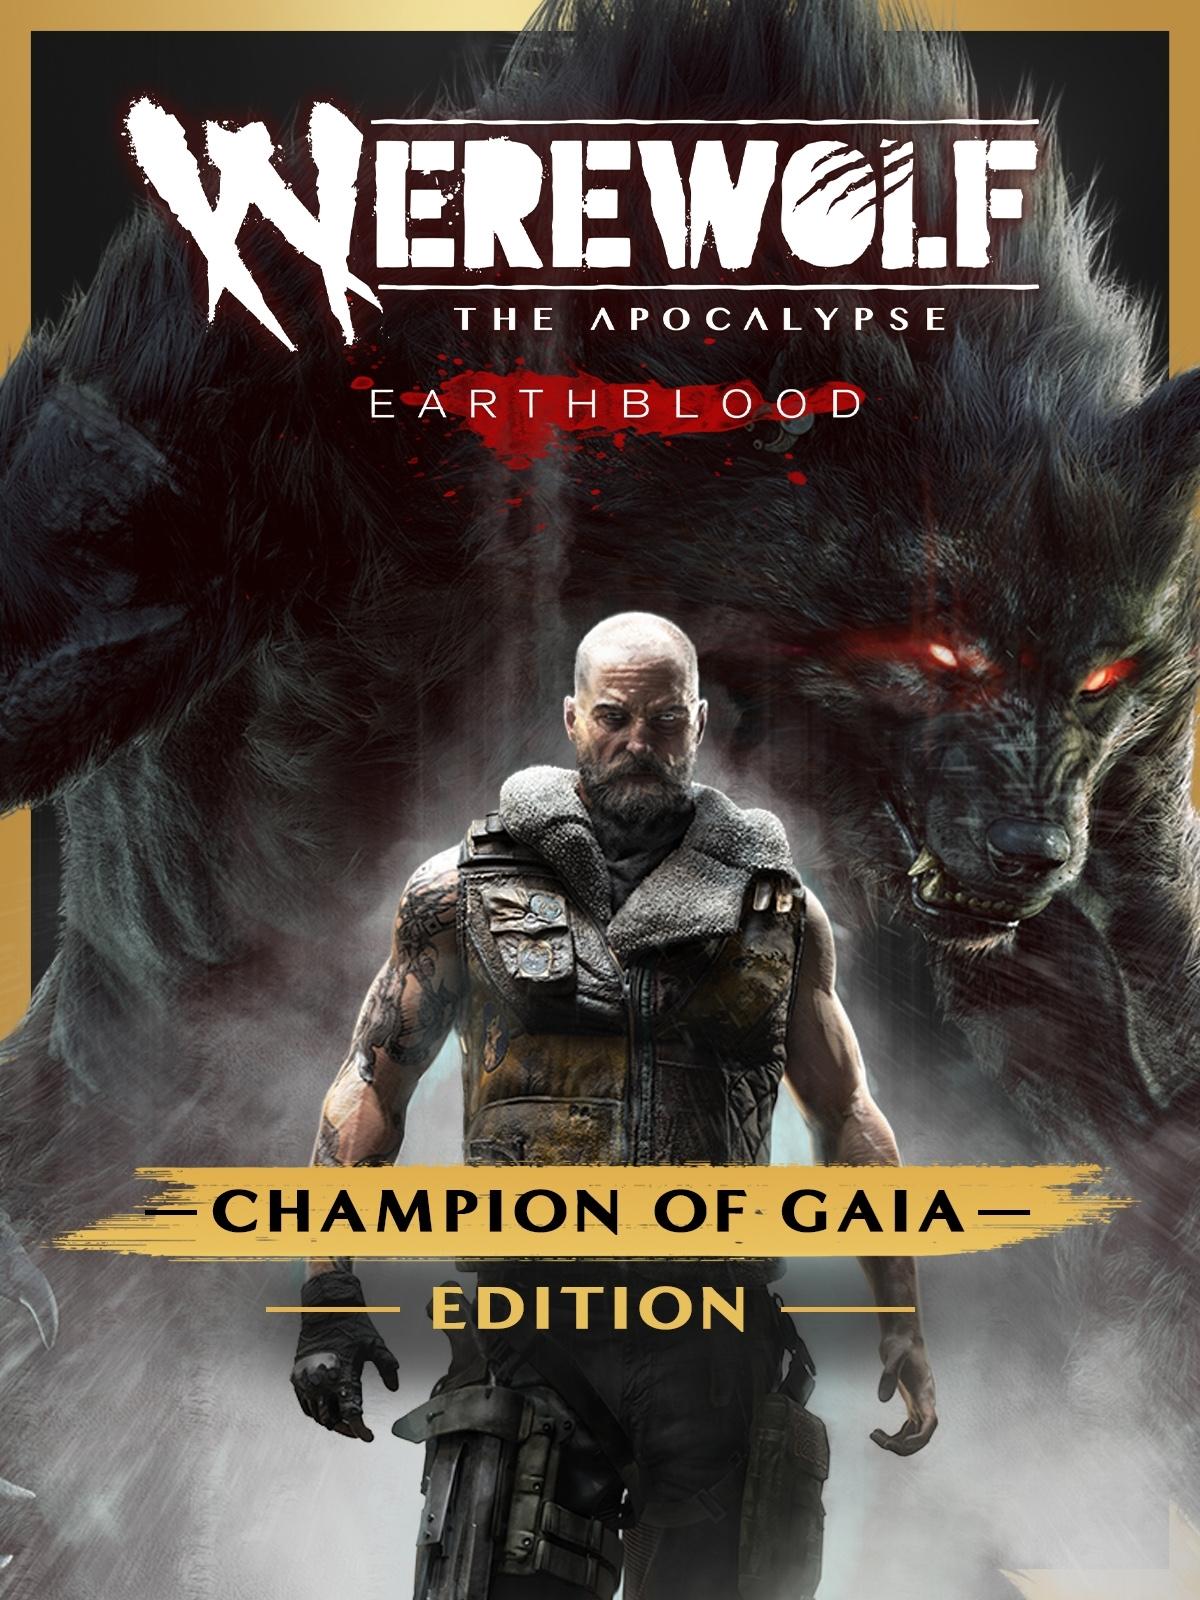 Werewolf: The Apocalypse - Earthblood Champion of Gaia Edition | ROW (d535b949-be48-45d7-be5f-7fe2d39ad678)